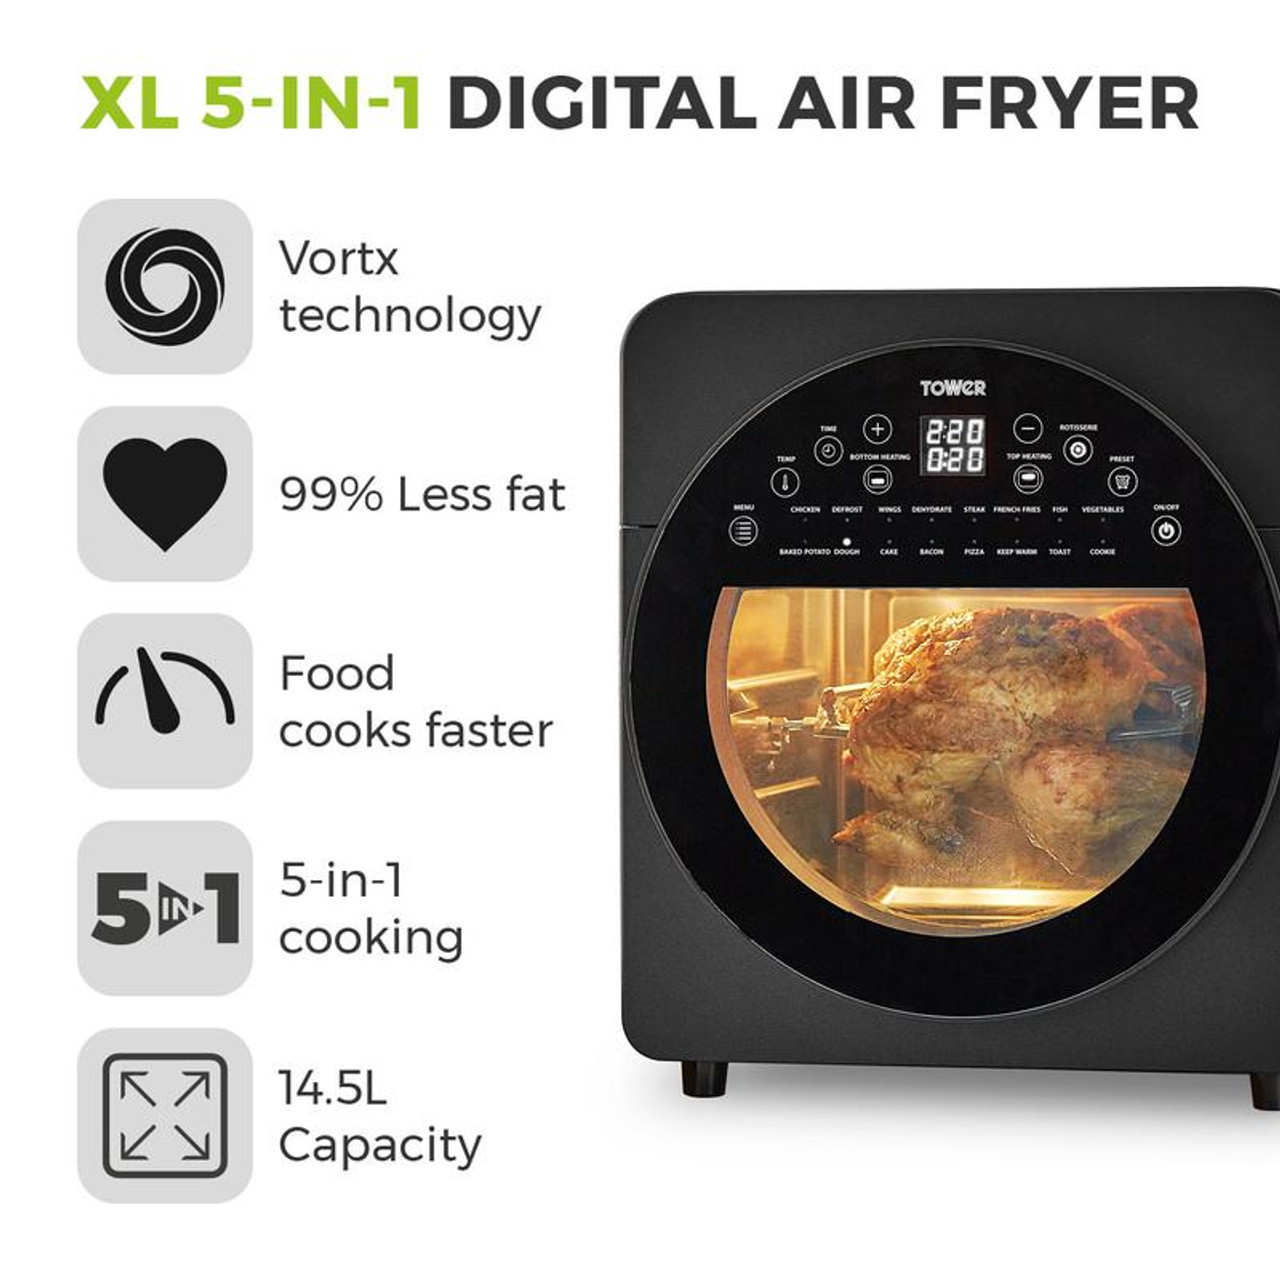 Tower Digital Air Fryer Oven With Rotisserie - 11Litres